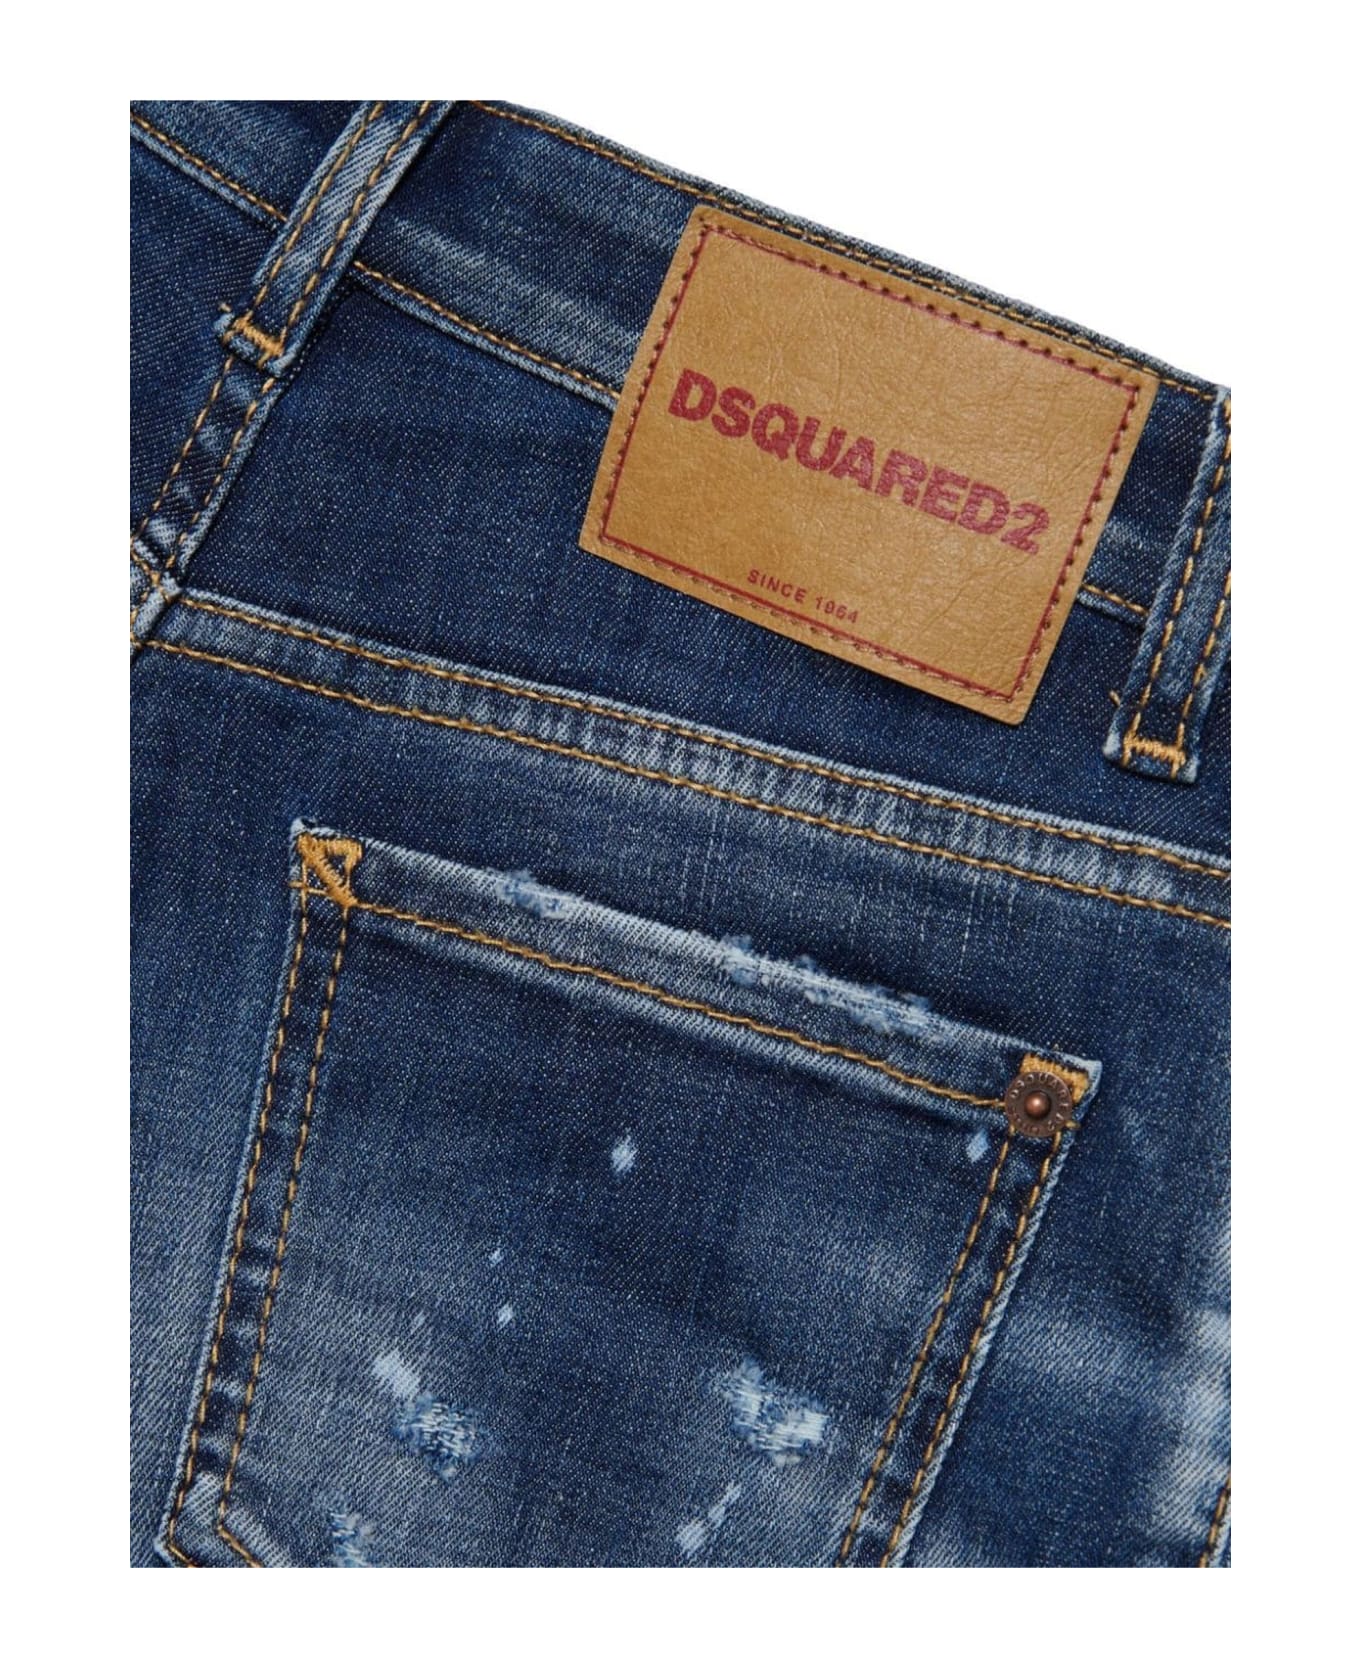 Dsquared2 Shorts Blue - Blue ボトムス